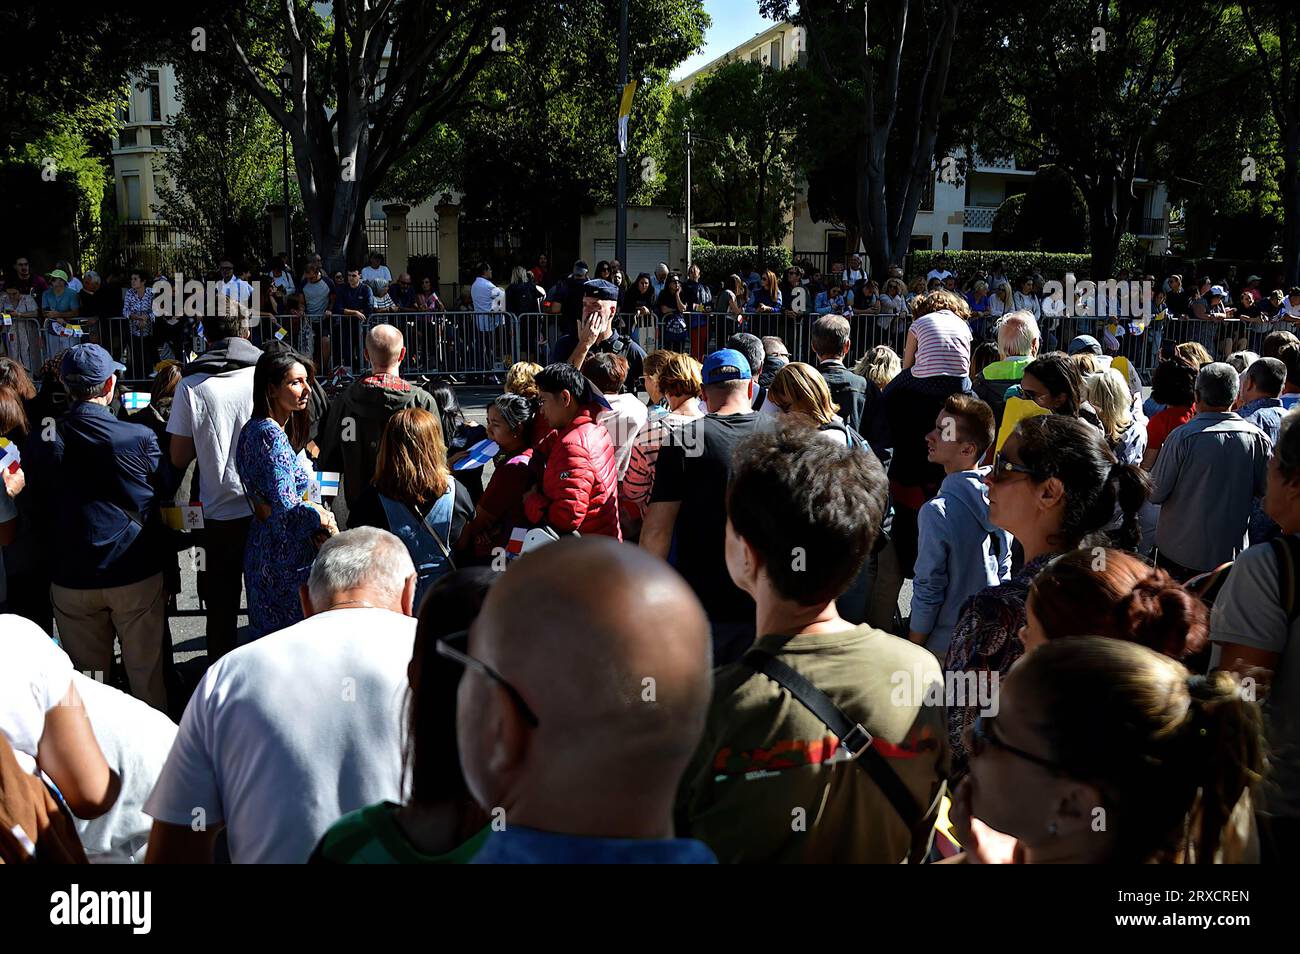 People gathered behind barriers wait to see Pope Francis pass in his “Papamobile”. Thousands of people came to see Pope Francis stroll in his “Papamobile” on Avenue du Prado, they attended the high mass on giant screens at the Vélodrome stadium. Stock Photo